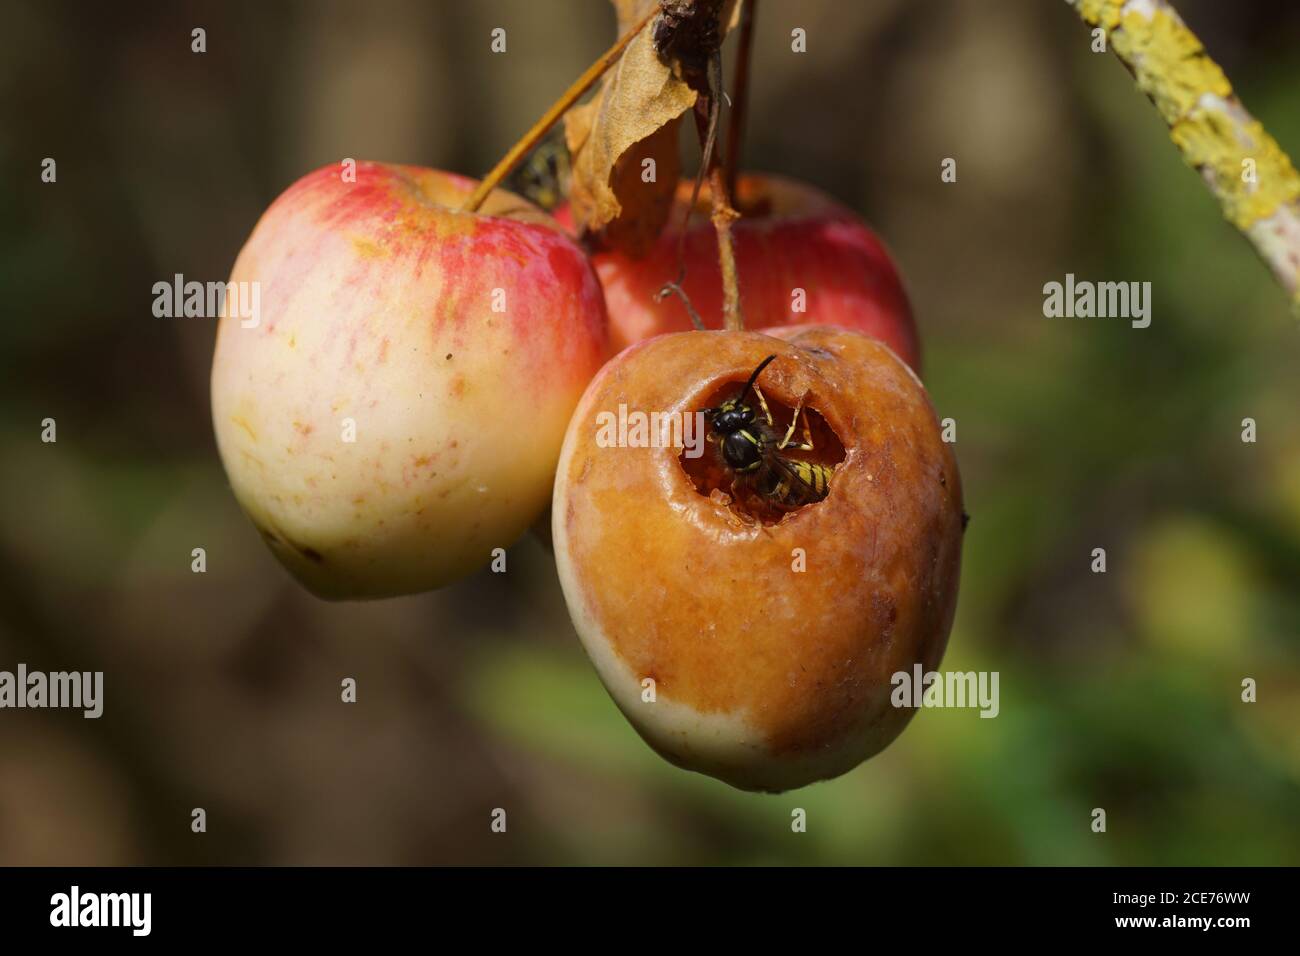 Three small apples and a wasp (Vespula vulgaris), family Vespidae in a Dutch garden. Netherlands August Stock Photo